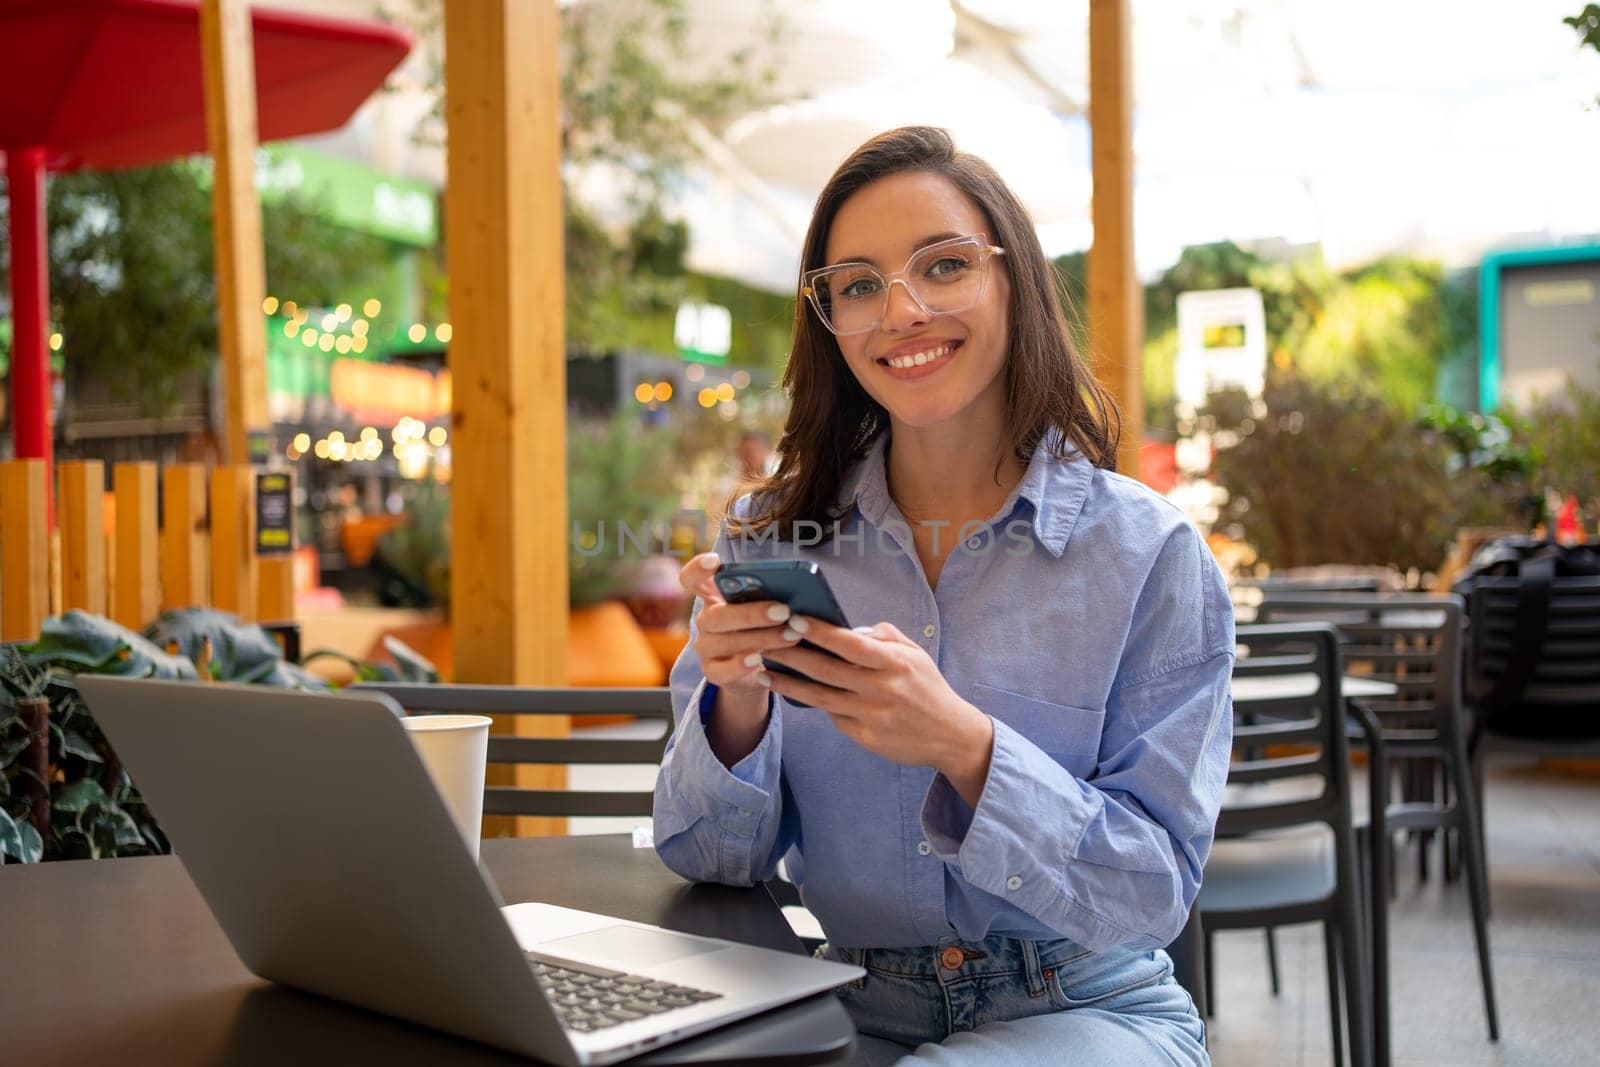 Freelance worker doing remote work using smartphone internet. looking at camera and smile. Business woman with mobile phone in outdoor cafeteria, restaurant on social media app online.